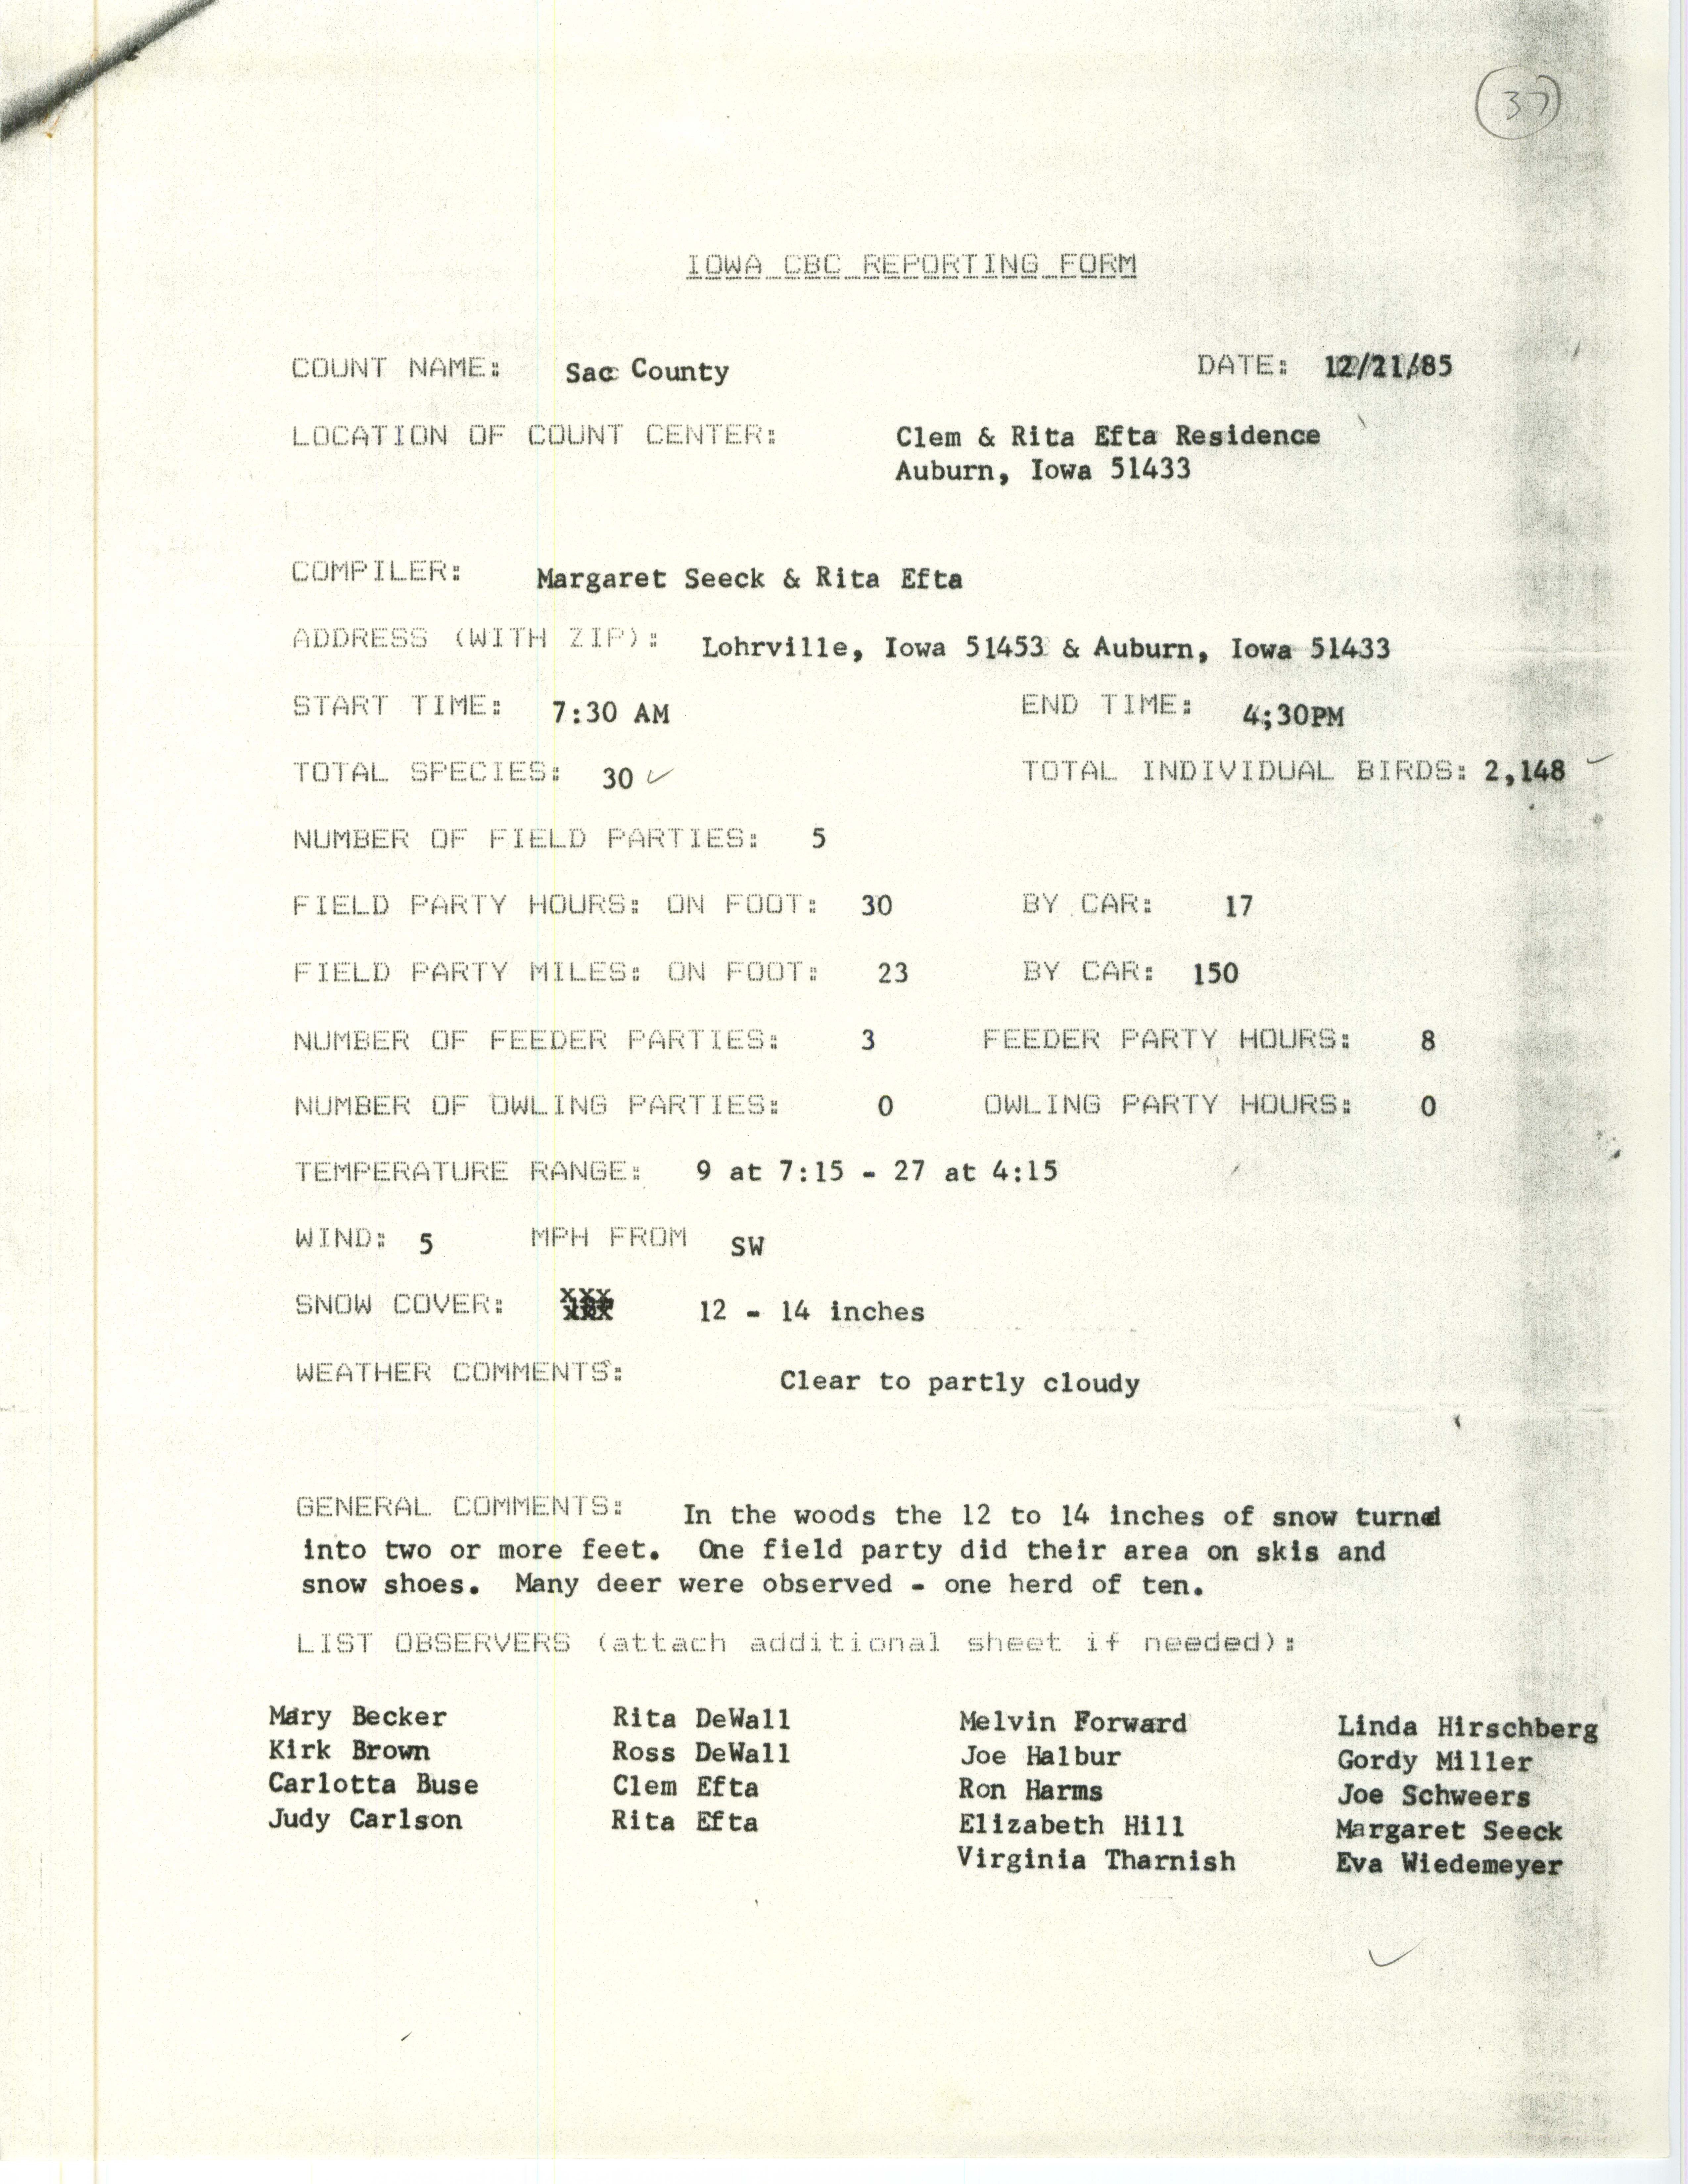 Iowa CBC reporting form, Sac County, December 21, 1985